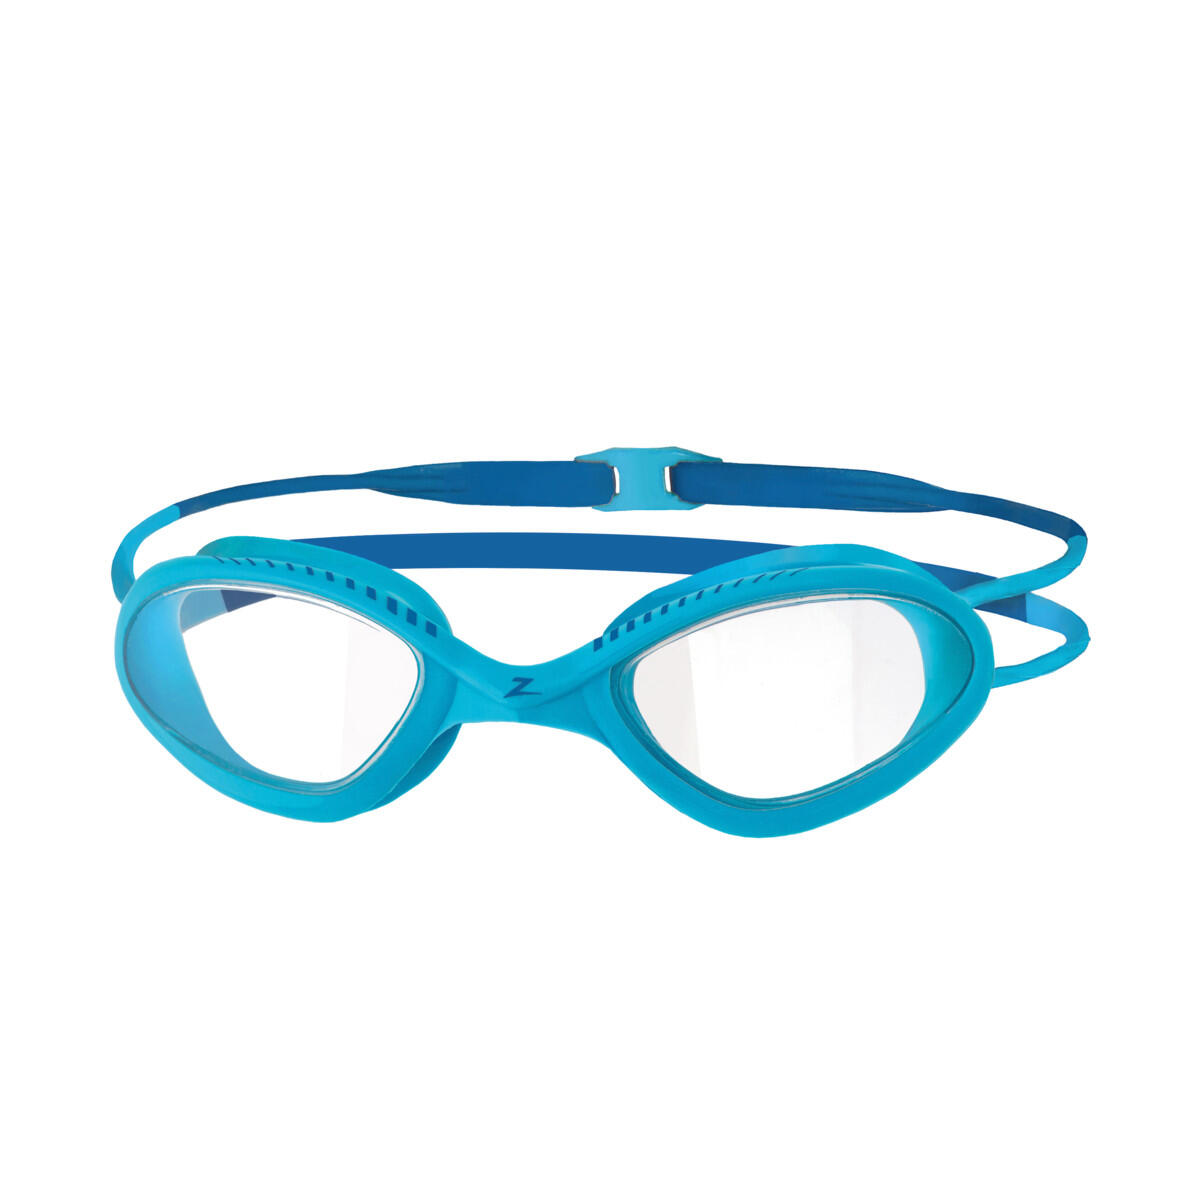 ZOGGS Zoggs Tiger Goggles - Blue/ Blue Reef/ Clear